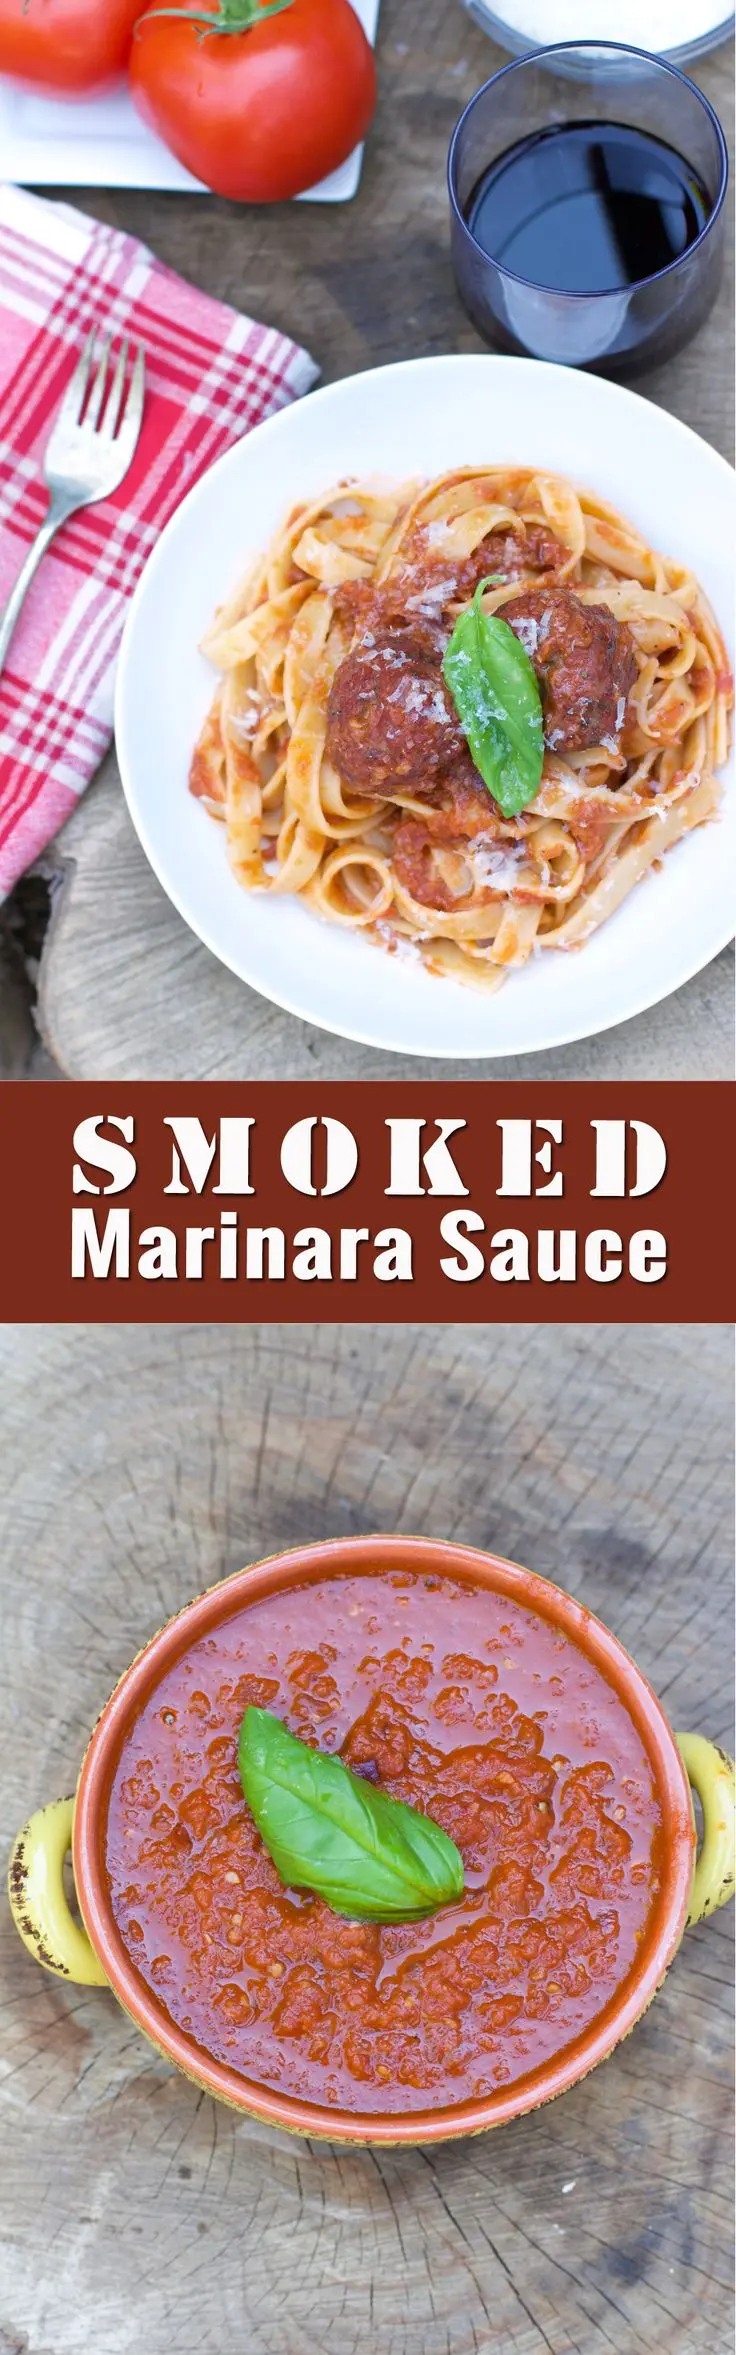 smoked marinara sauce - What is the difference between arrabiata sauce and marinara sauce